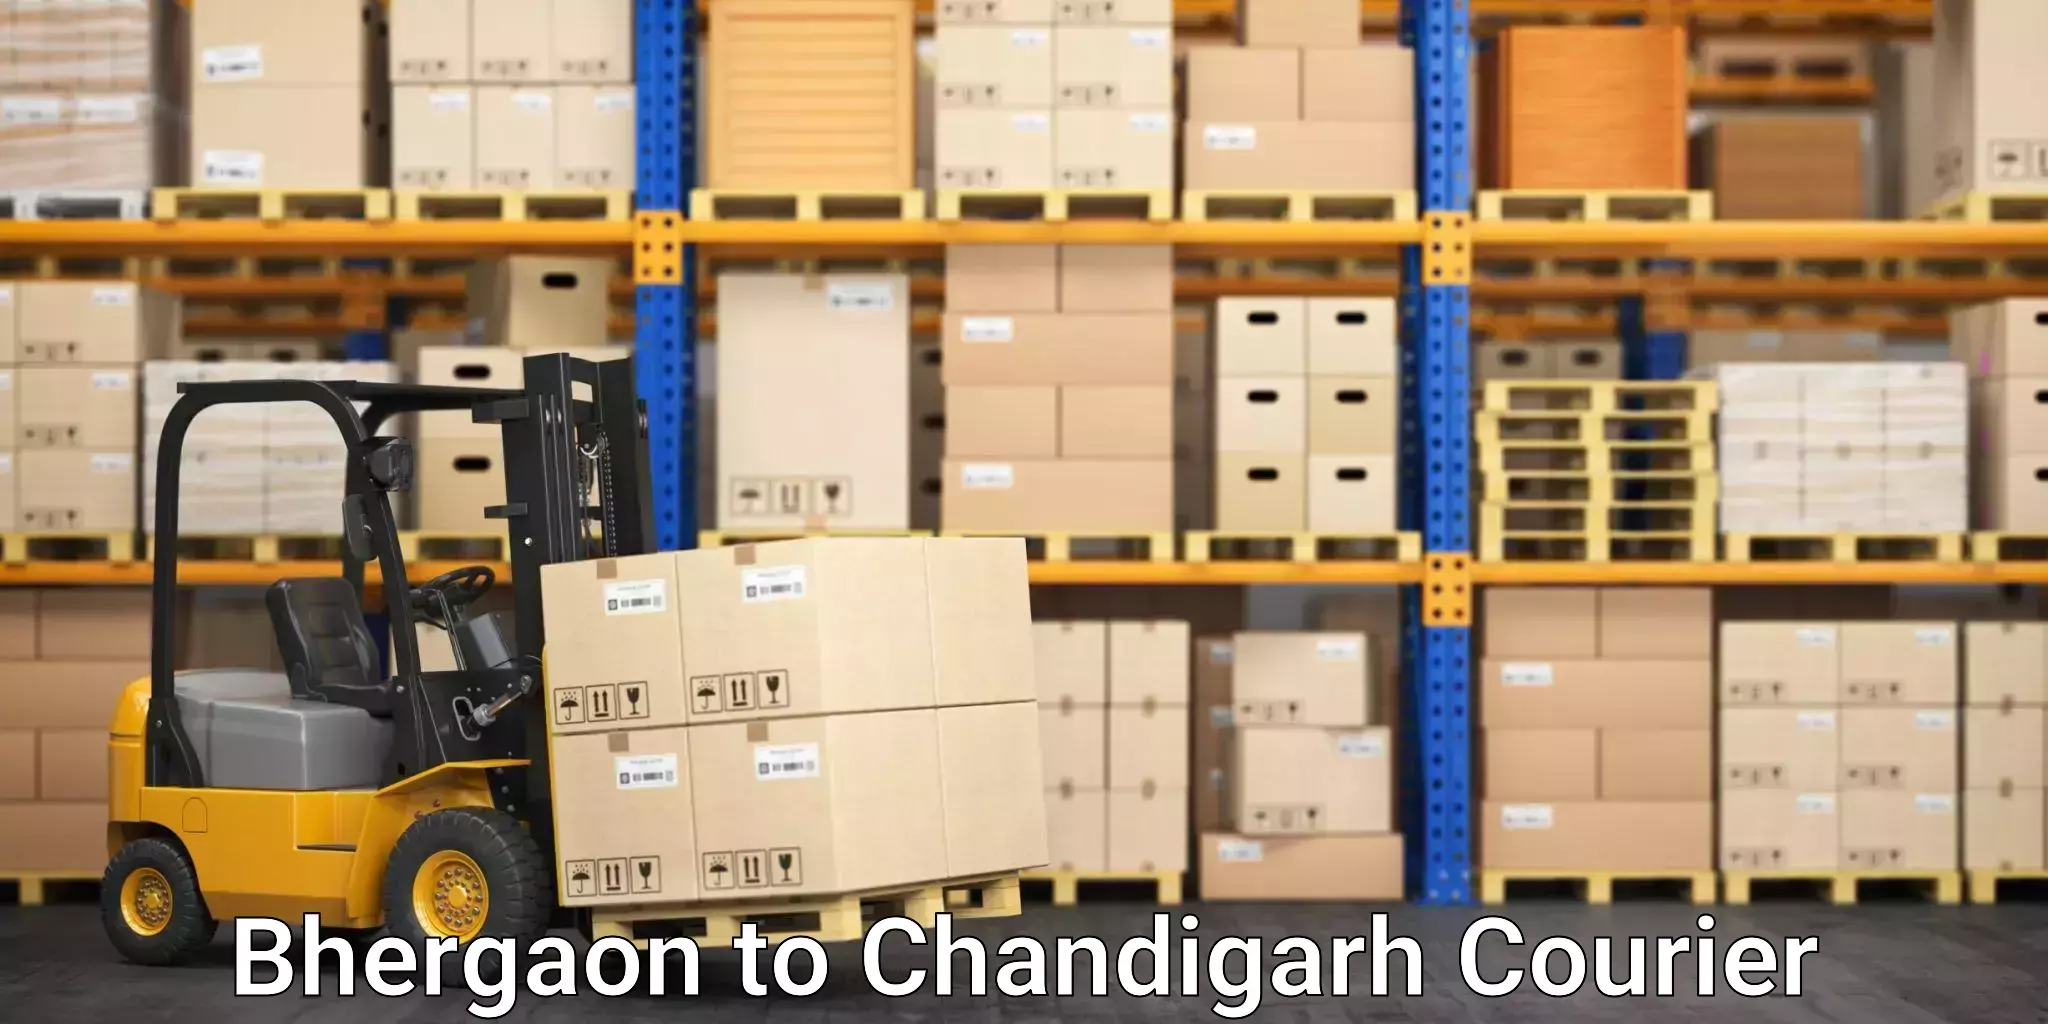 Nationwide shipping services Bhergaon to Chandigarh